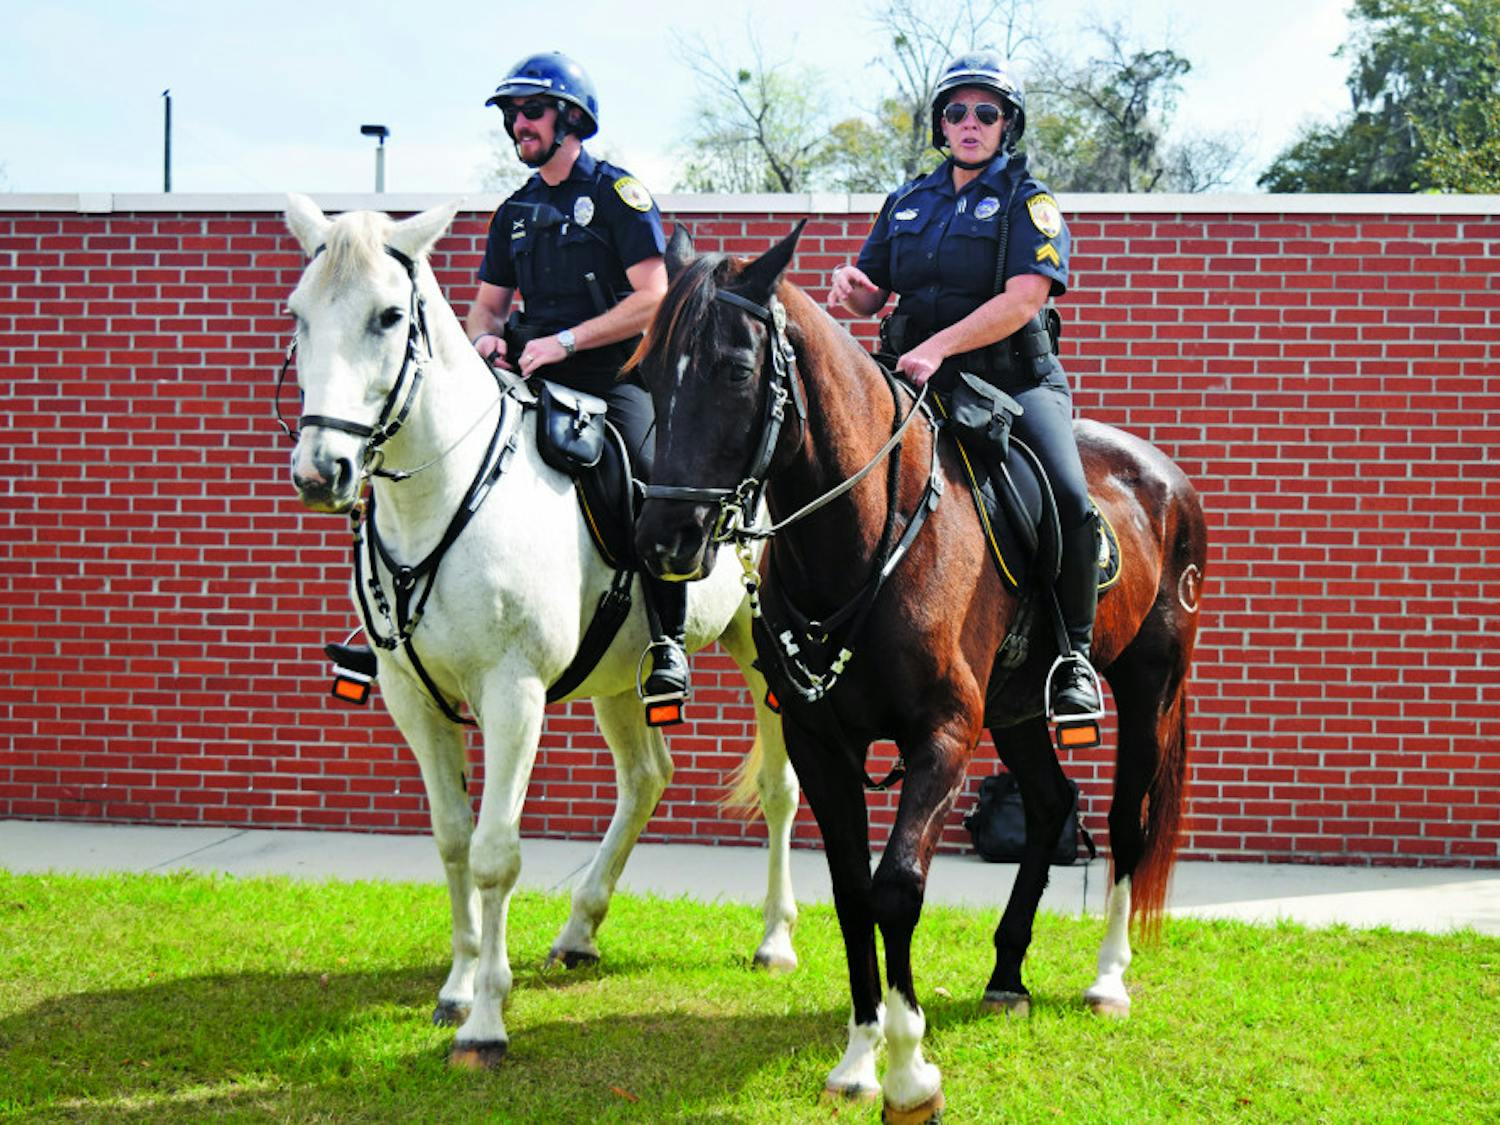 From left: Officer Ryan Foster rides Merlin and Cpl. Tracy Fundenburg rides Zeus. The two horses have been working for Gainesville Police’s mounted unit for about 10 years. On Tuesday, the horses retired. 